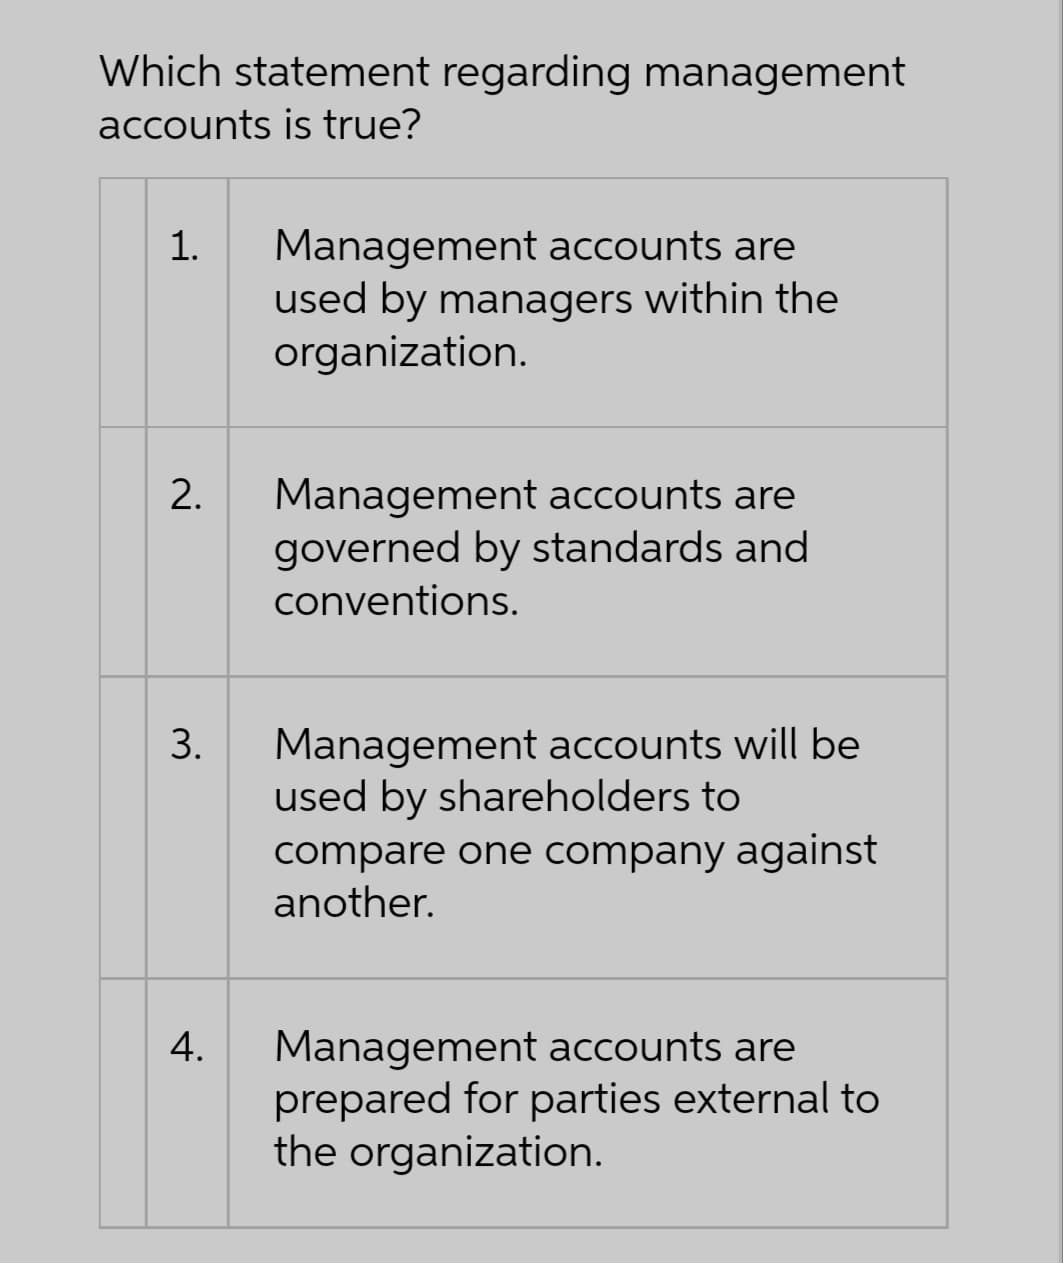 Which statement regarding management
accounts is true?
1. Management accounts are
used by managers within the
organization.
2.
3.
4.
Management accounts are
governed by standards and
conventions.
Management accounts will be
used by shareholders to
compare one company against
another.
Management accounts are
prepared for parties external to
the organization.